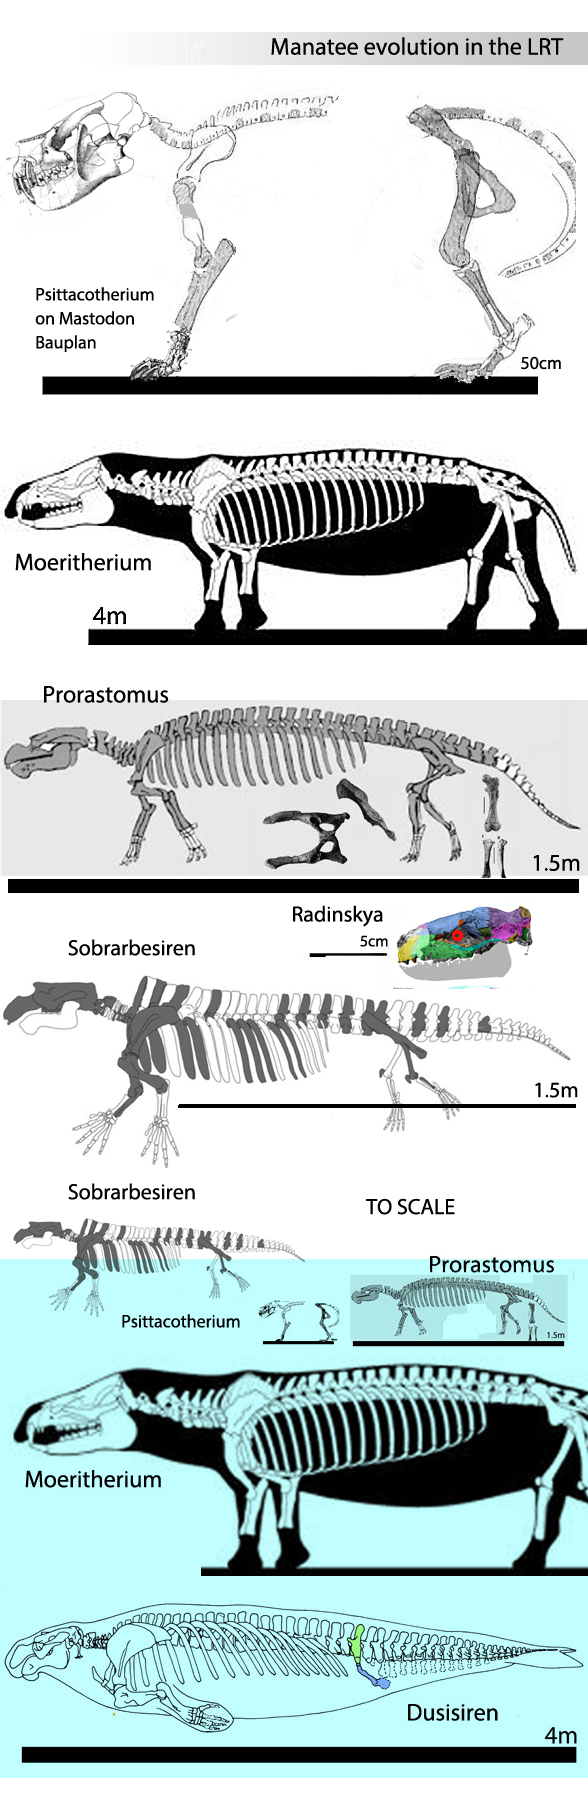 Figure 2. Skeletons of stylinodons (Psittacotherium), Moeritherium, Prorastomus and Dusisiren demonstrating the evolution of sea cows from these taxa in the LRT.